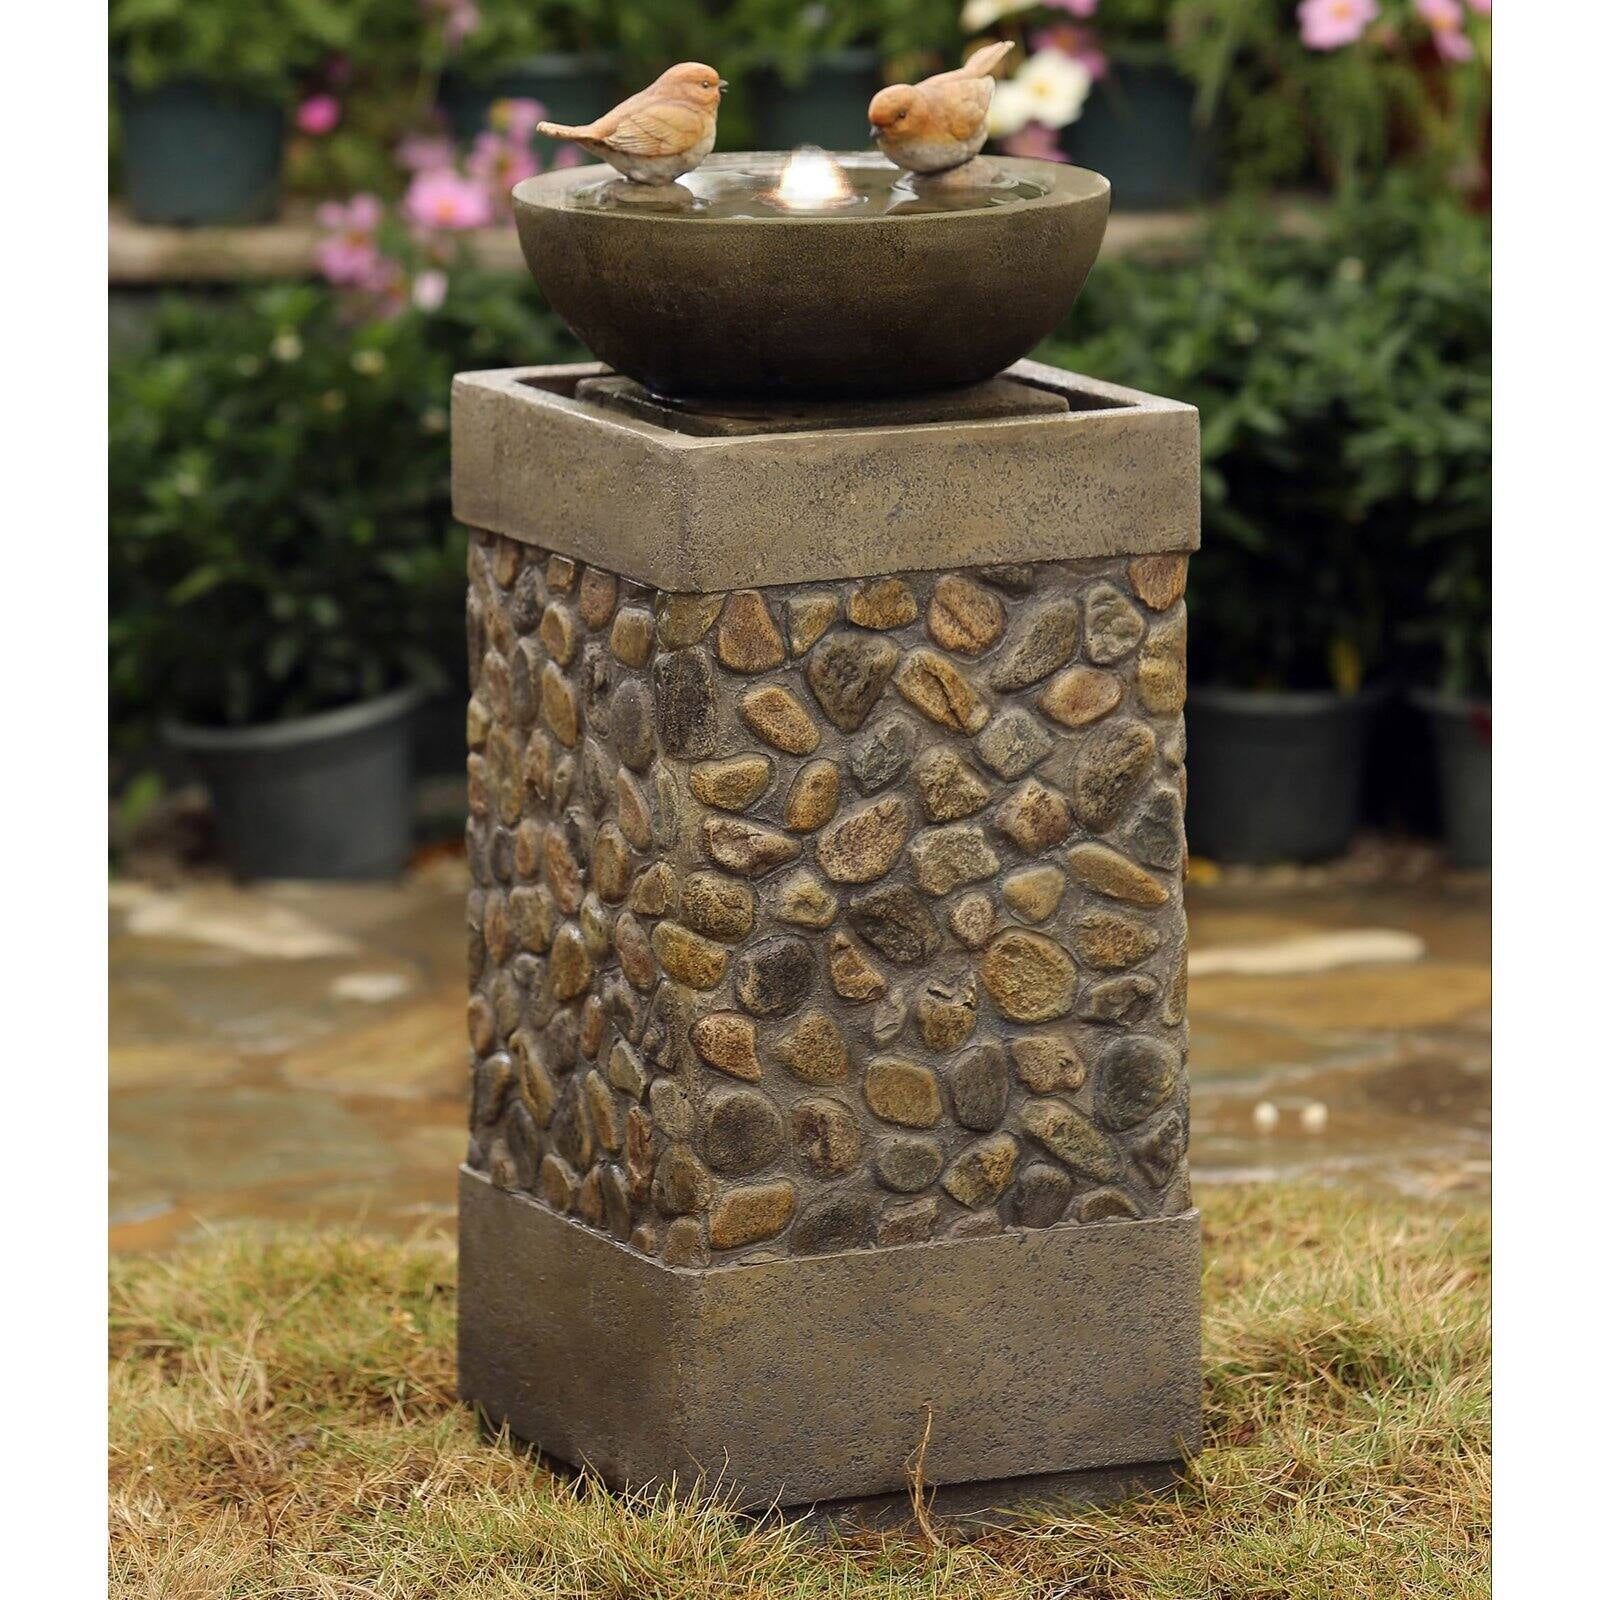 Details about   16 in Birdhouse Fountain w/ LED Lights 